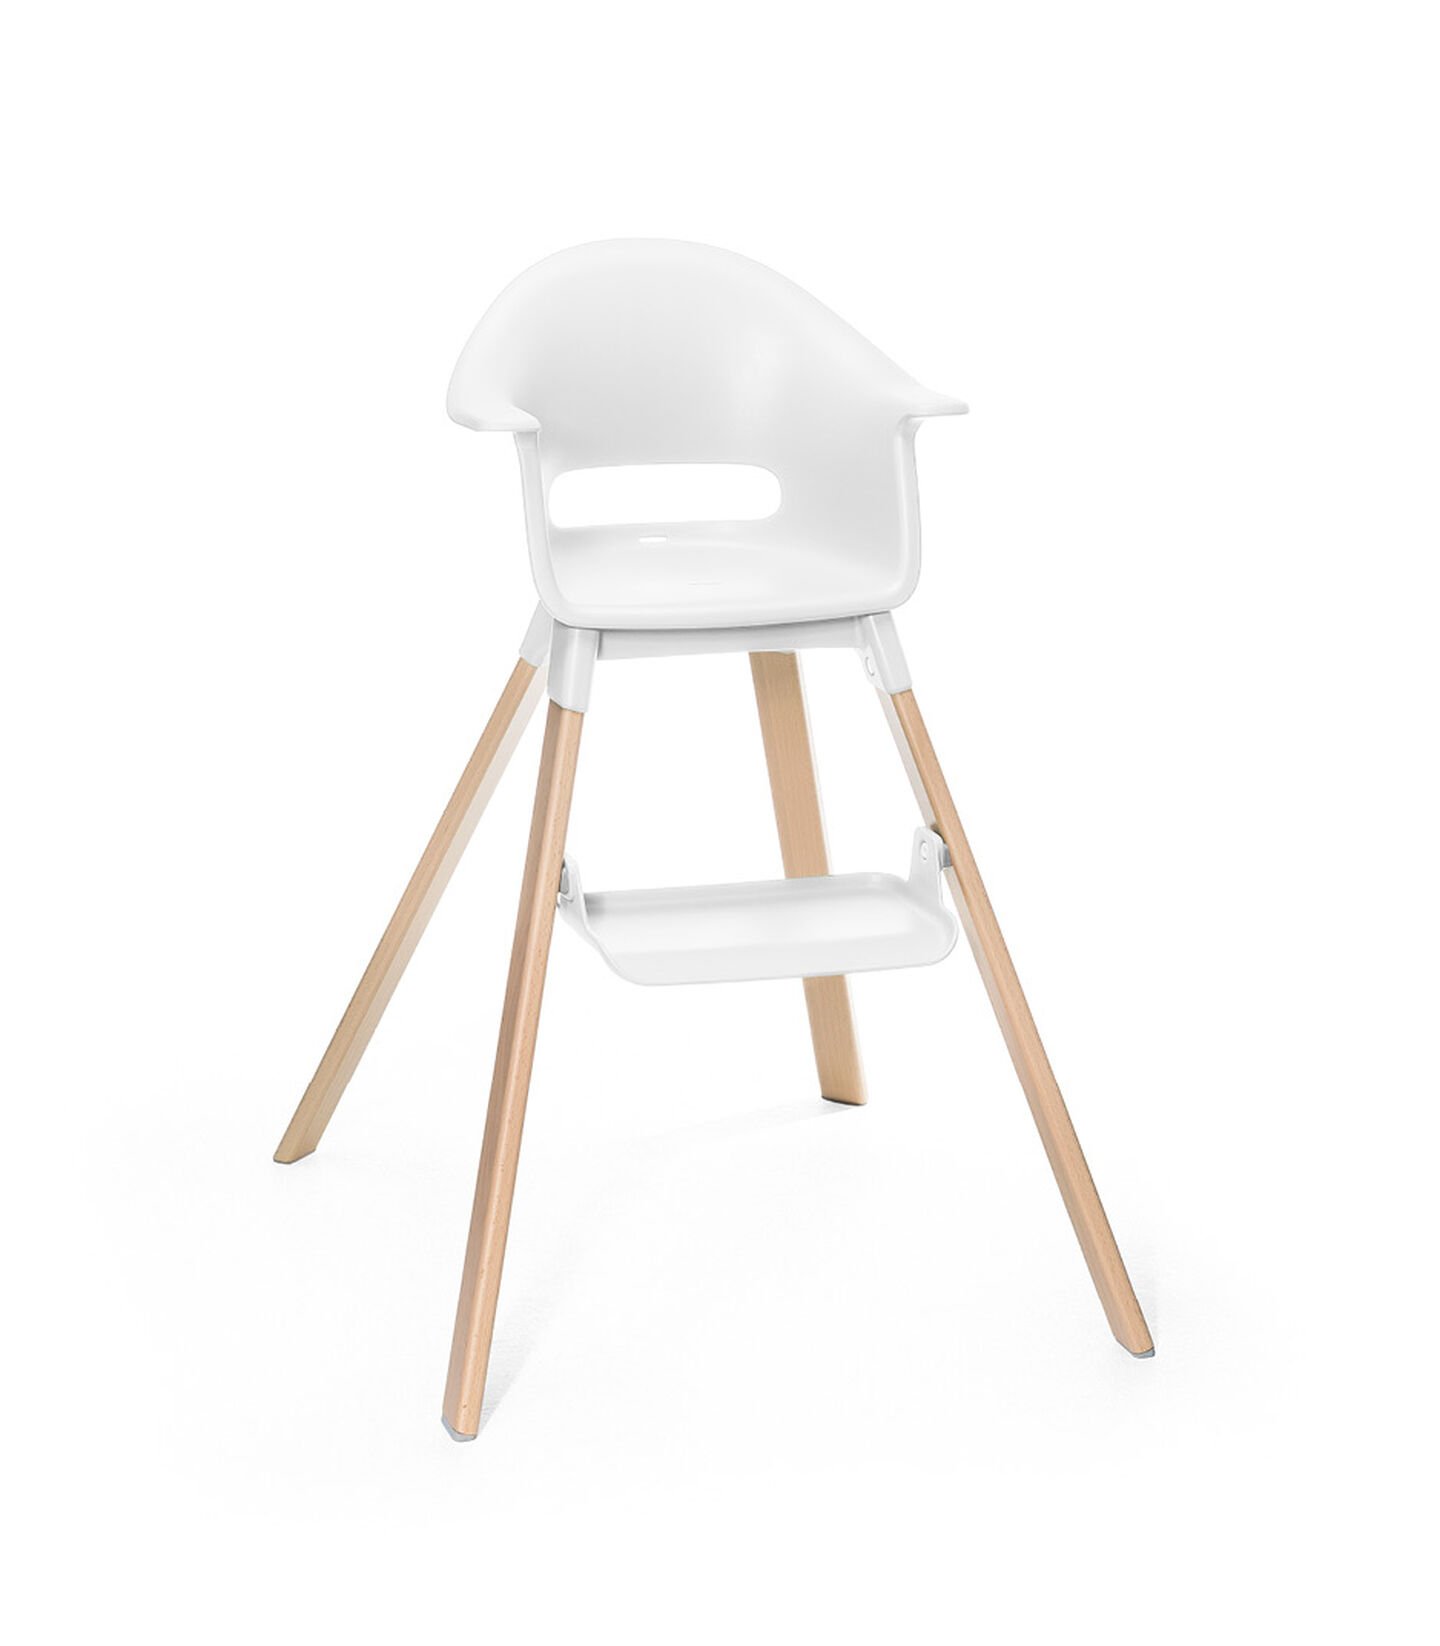 Stokke® Clikk™ High Chair. Natural Beech wood and White plastic parts. view 3